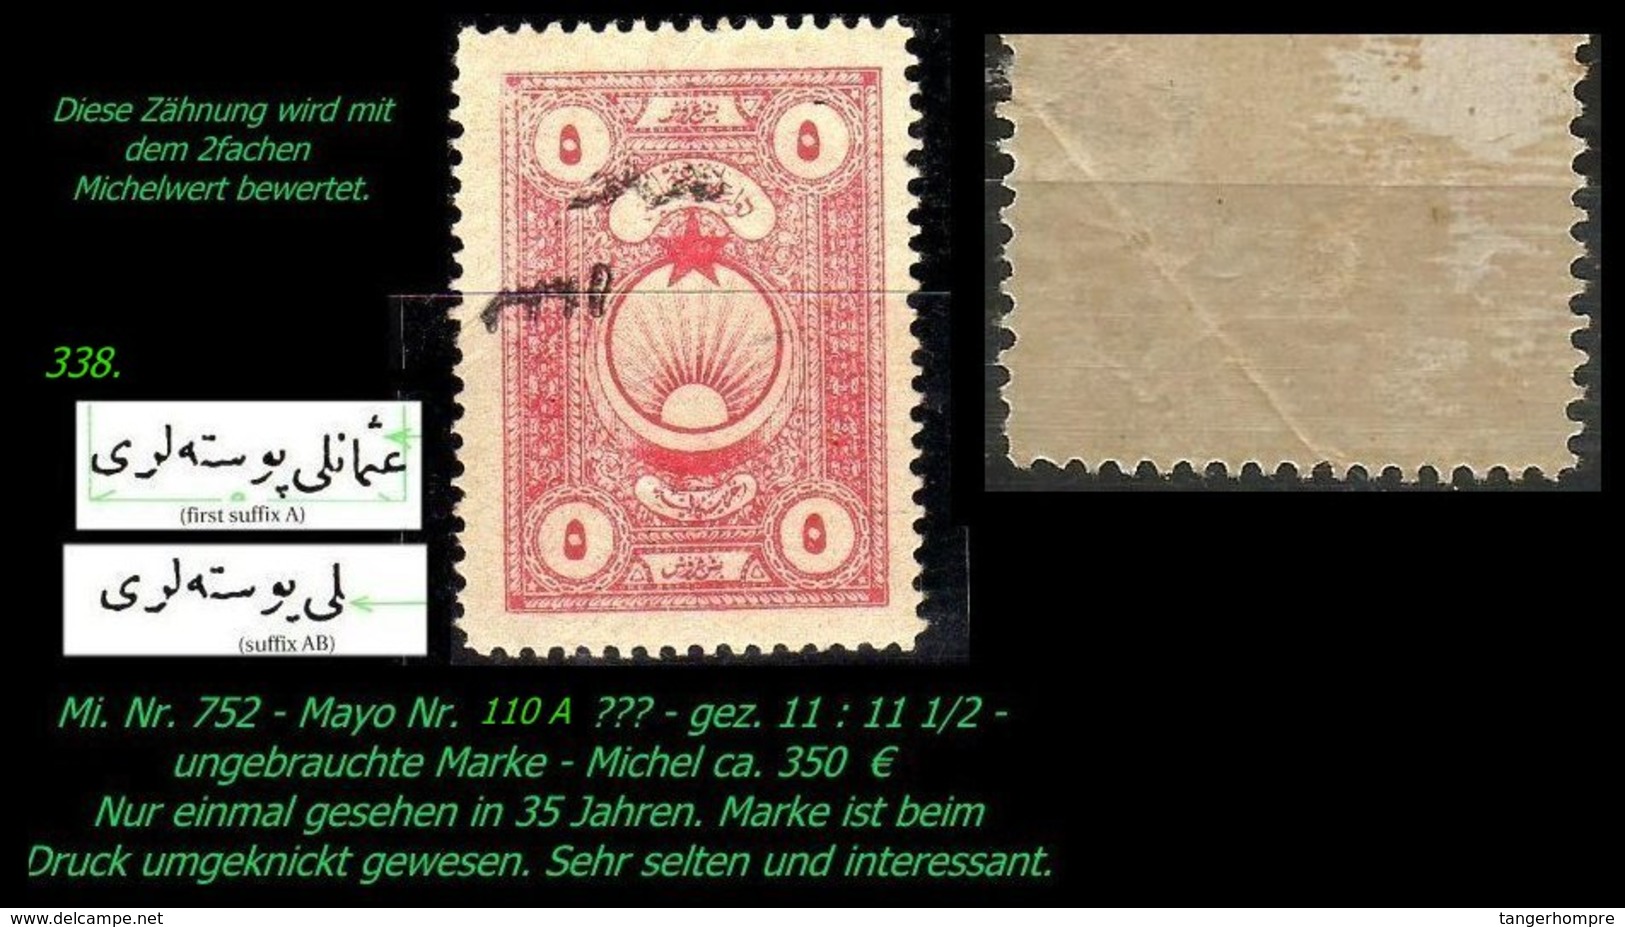 EARLY OTTOMAN SPECIALIZED FOR SPECIALIST, SEE...Mi. Nr. 752 - Mayo 110 A -sehr Seltene Abart -RRR- - 1920-21 Anatolia